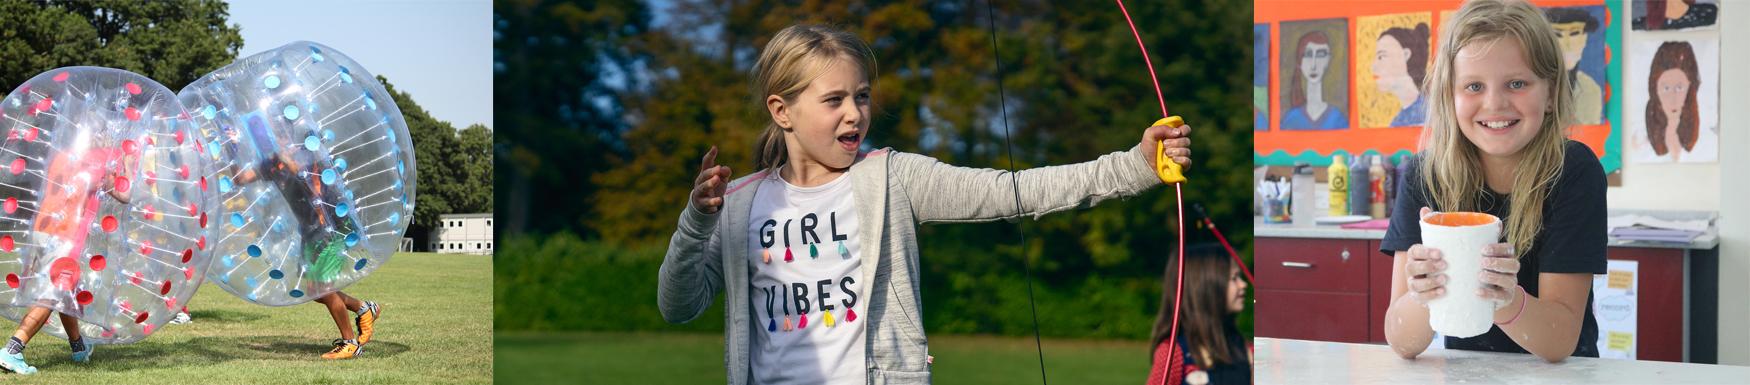 Zorbing archery and art holiday camp activities